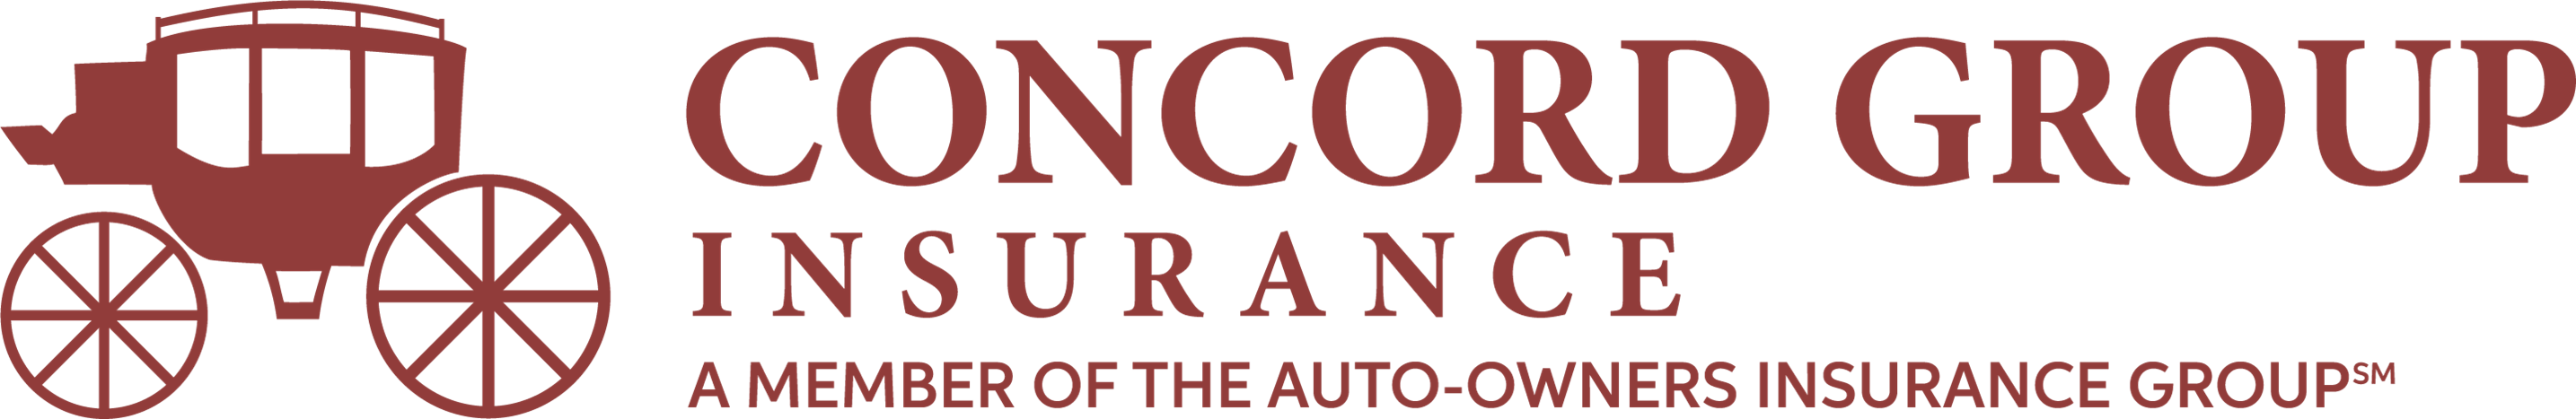 Auto-Owners Logo - Concord Group Insurance Group Insurance